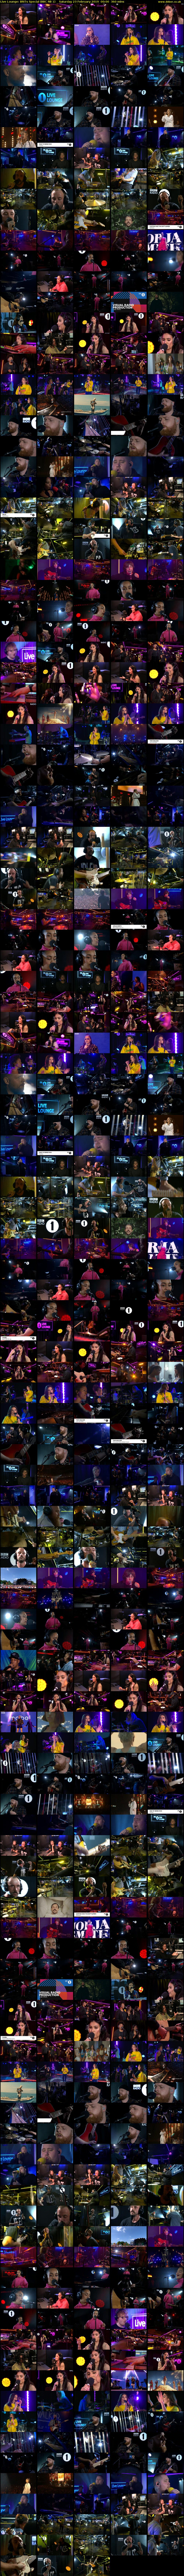 Live Lounge: BRITs Special (BBC RB 1) Saturday 23 February 2019 00:00 - 06:00